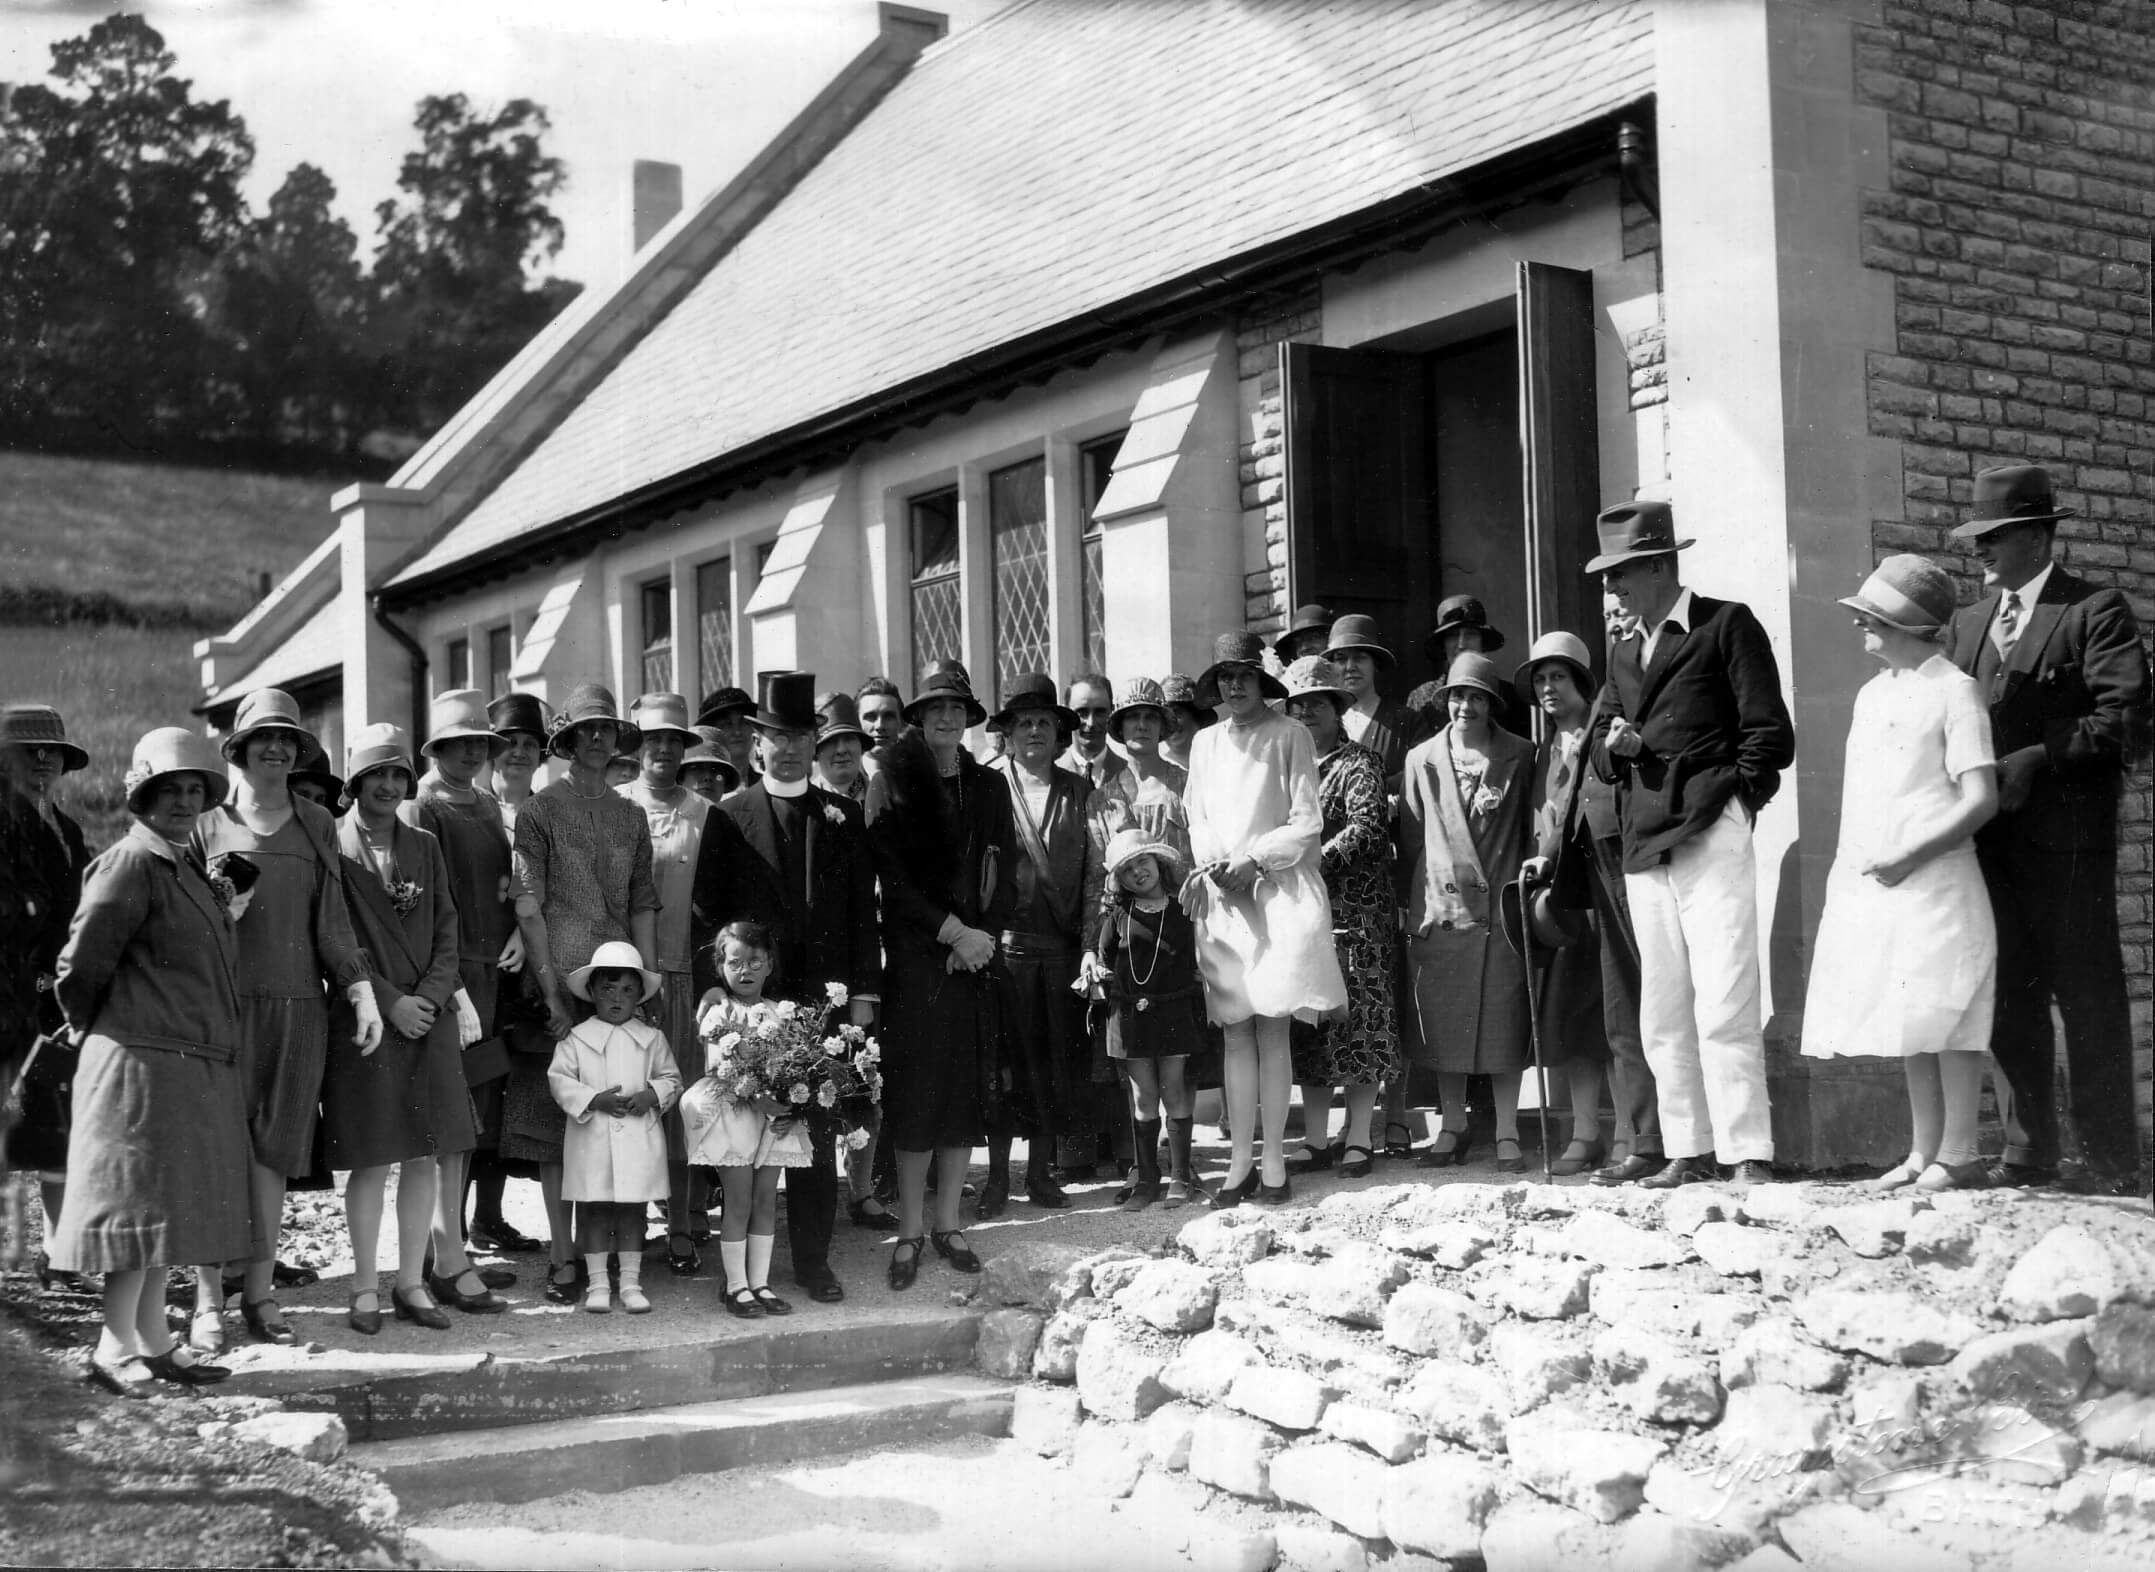 Monkton Combe Village Hall - official opening in 1928